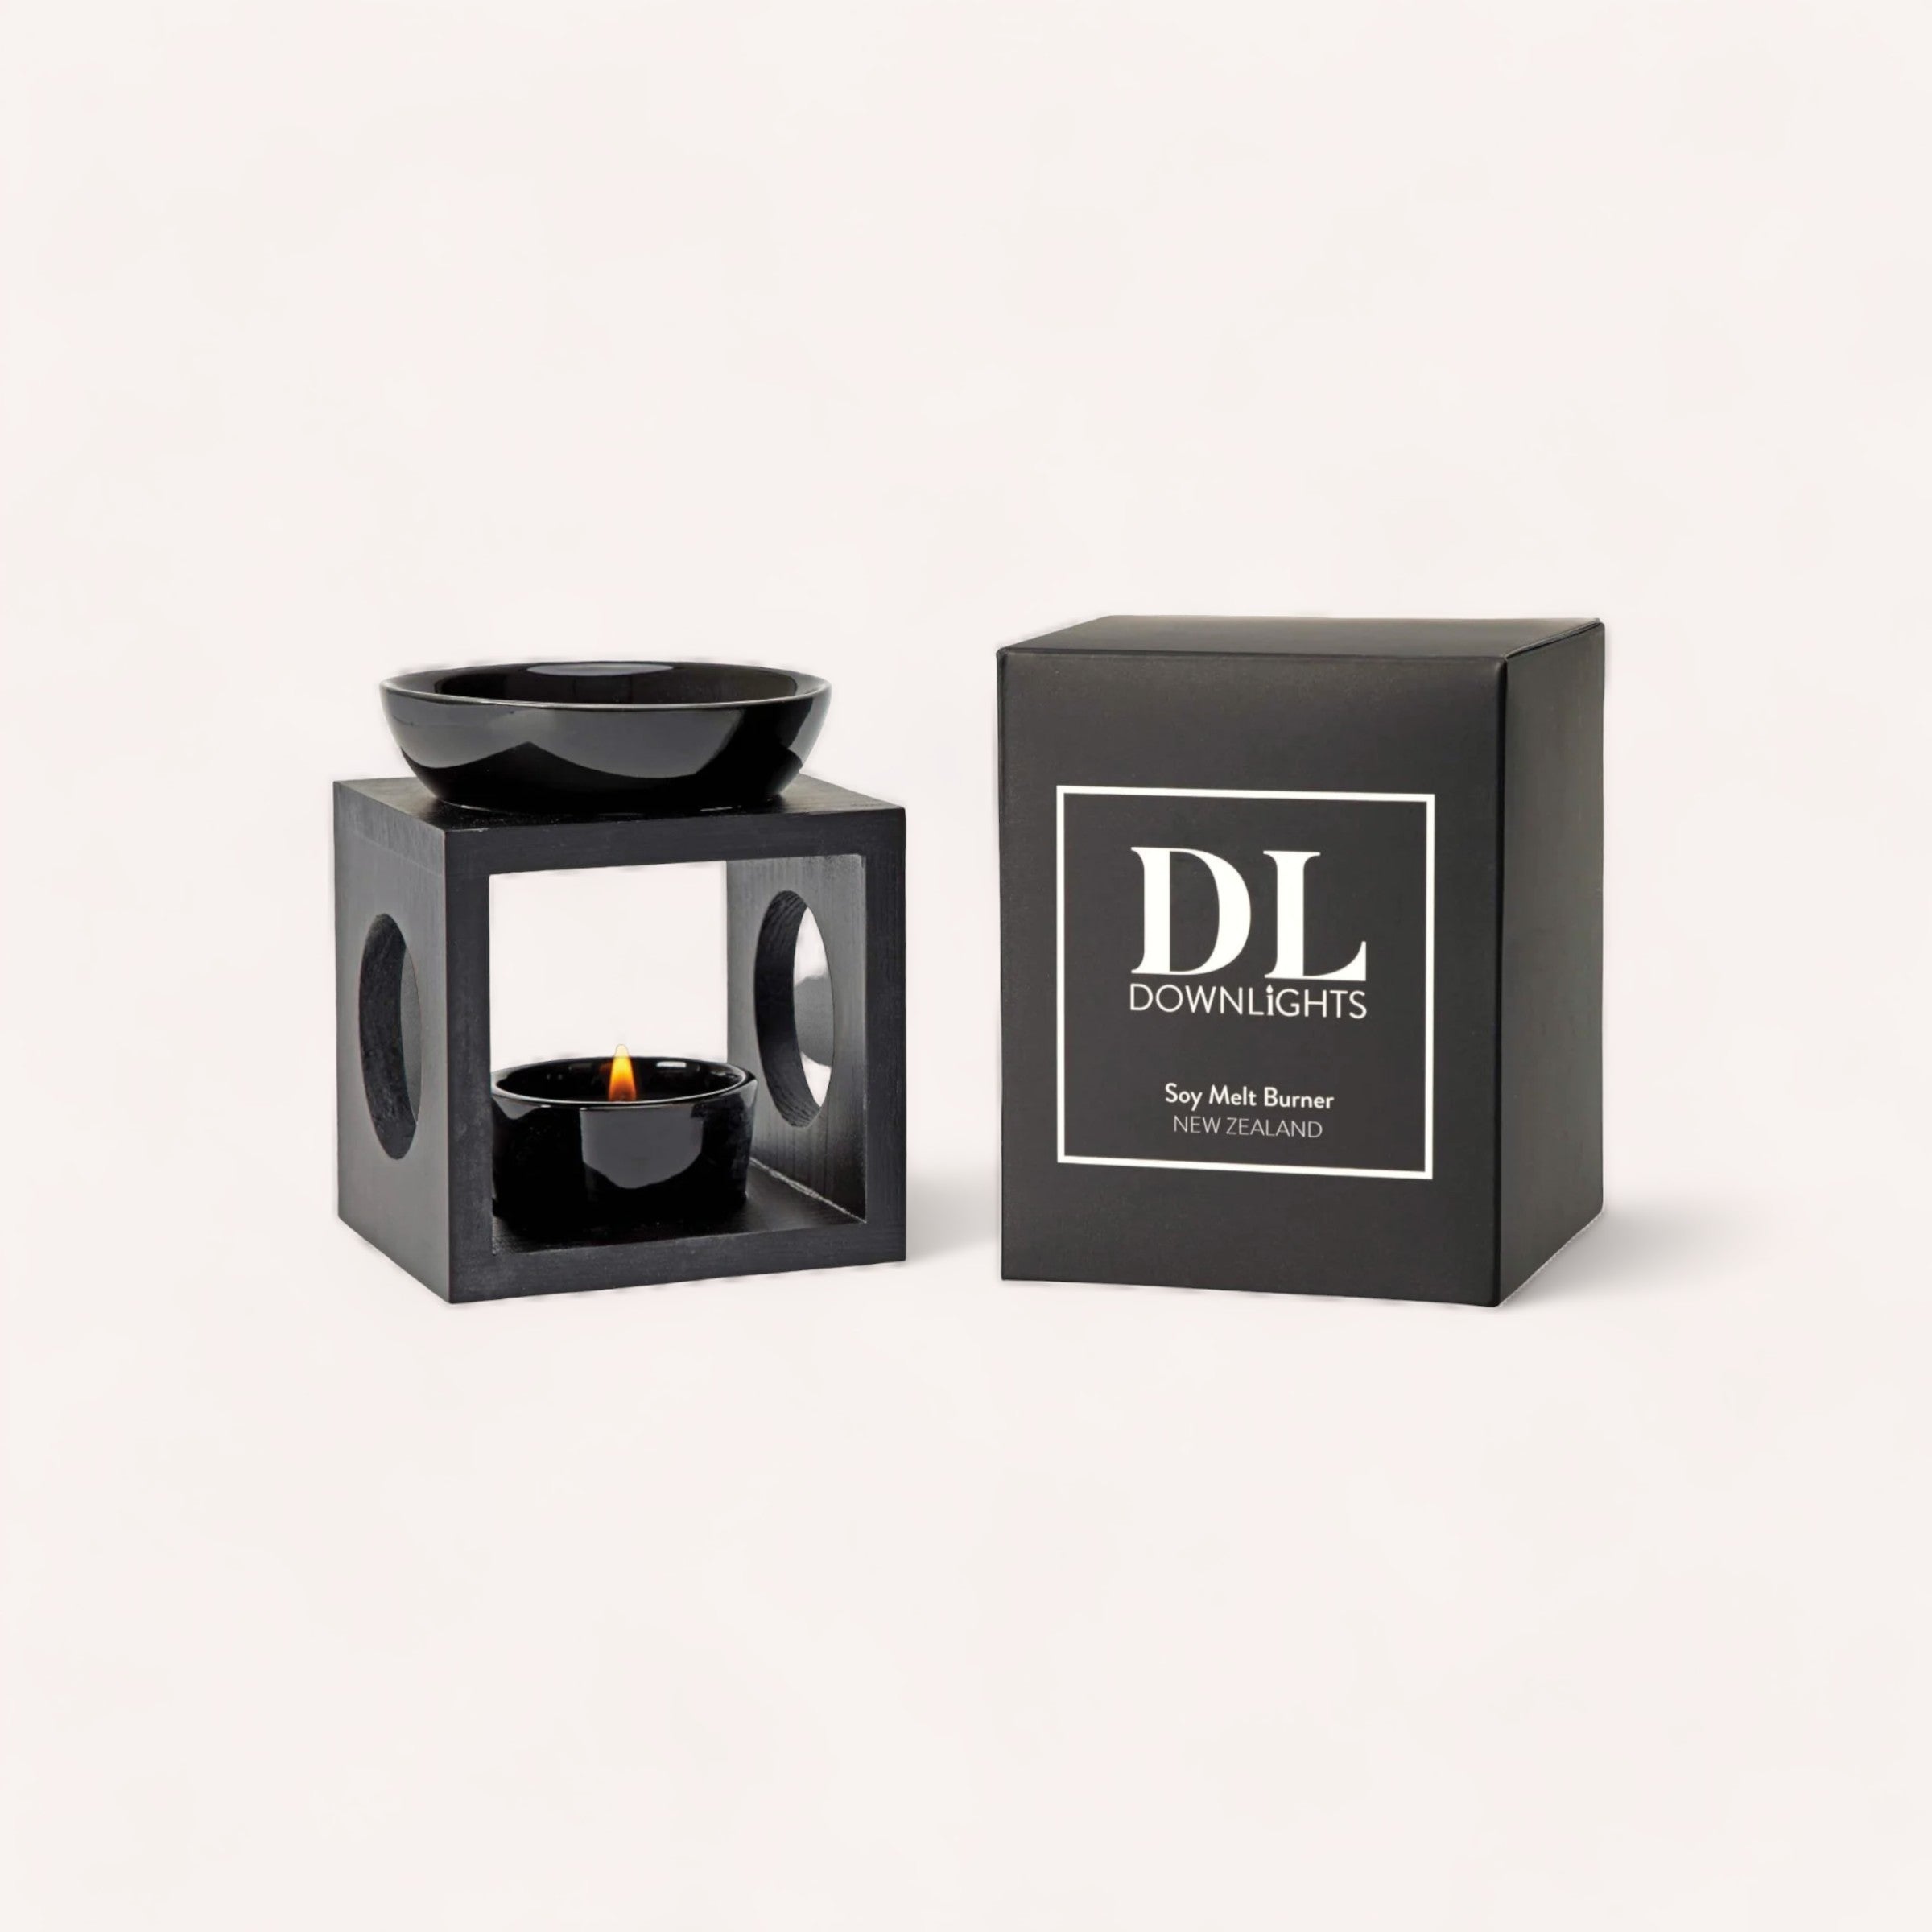 A sleek black Downlights Soy Melt Burner paired with its elegant packaging box on a neutral background.